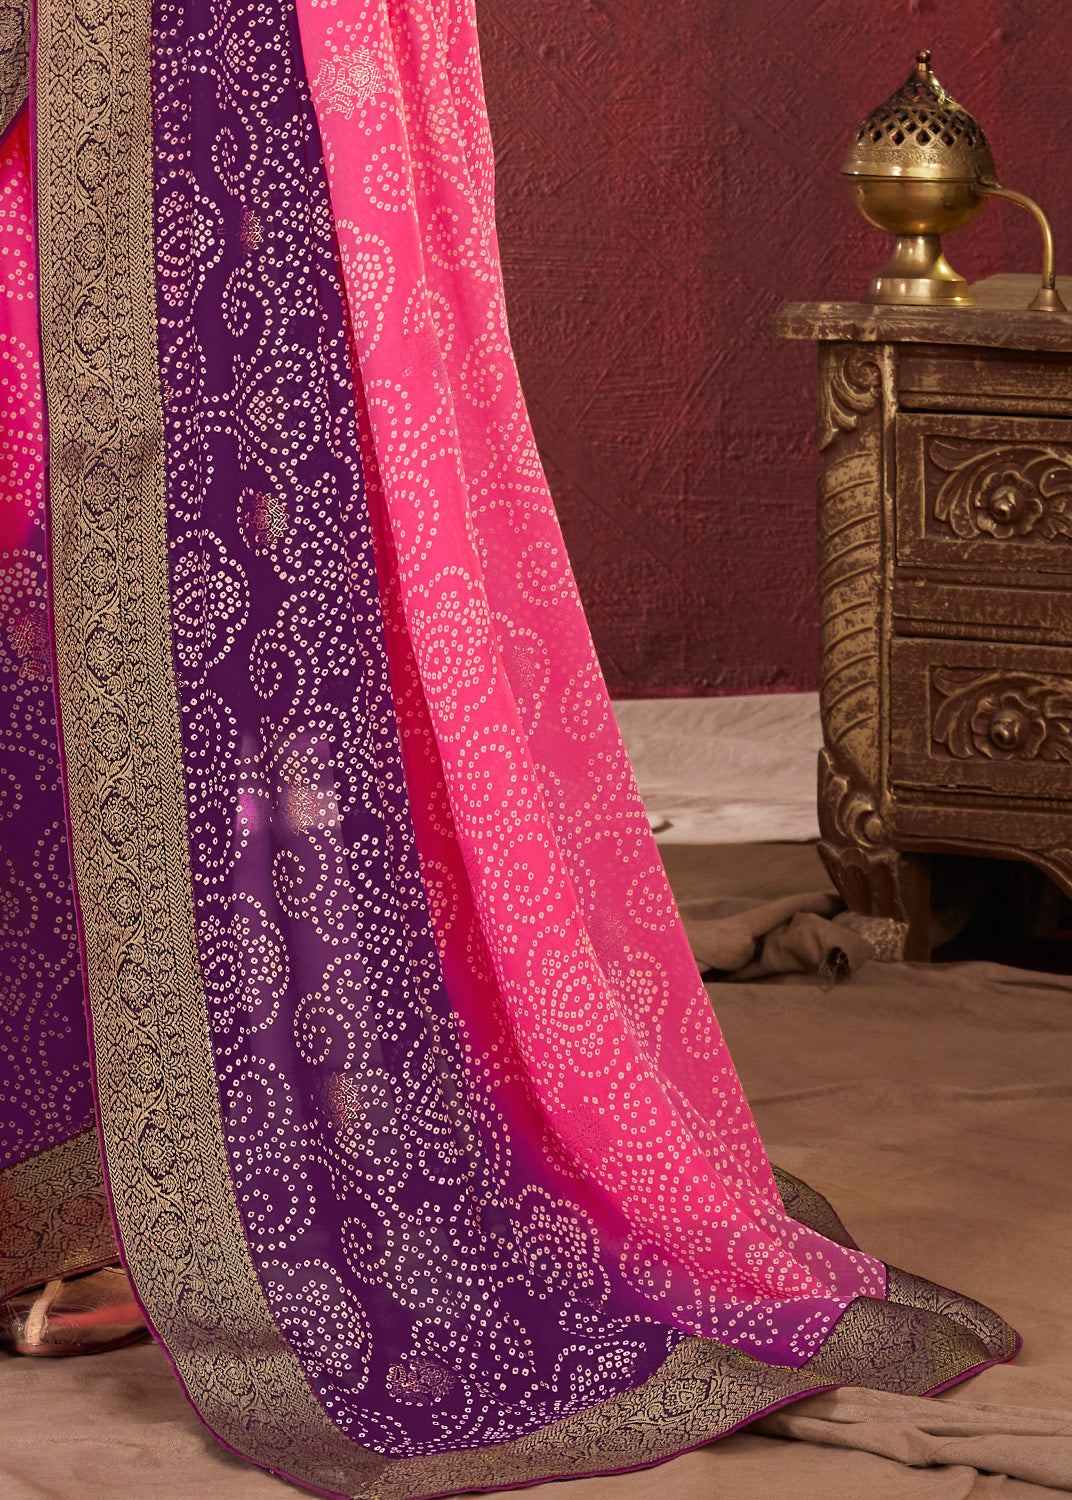 Dual Shades Bandhani Printed Purple Pink Weightless Georgette Saree With Embroidery Lace